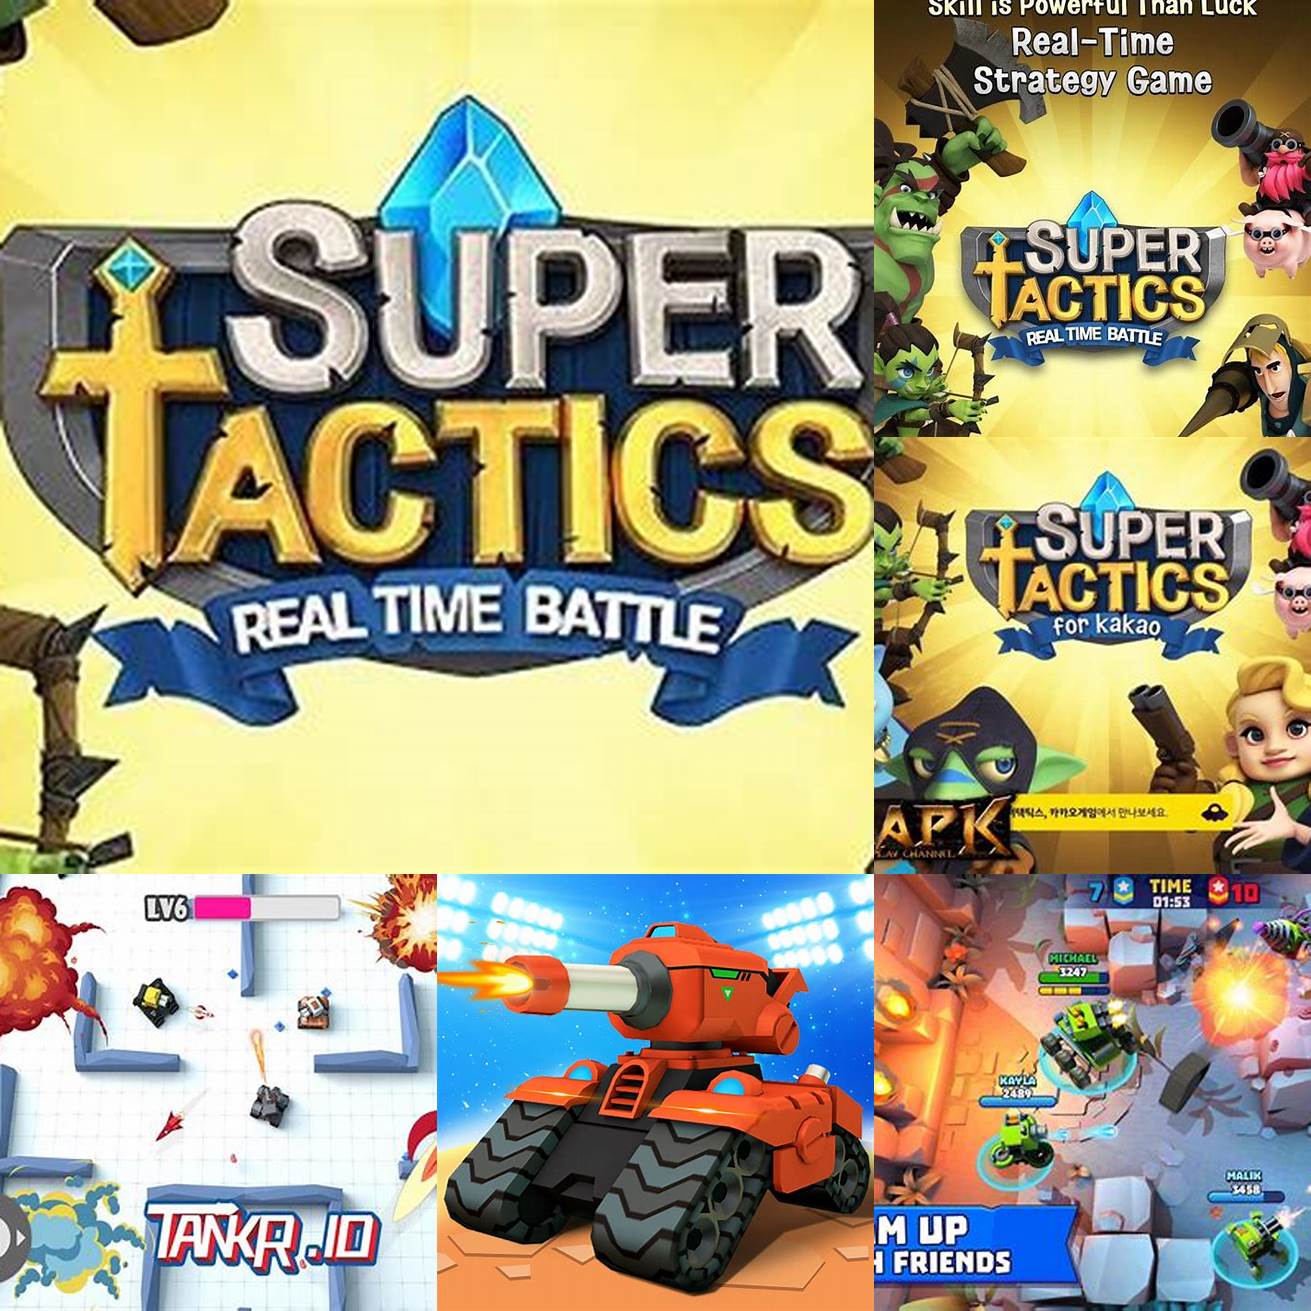 Real-time battles